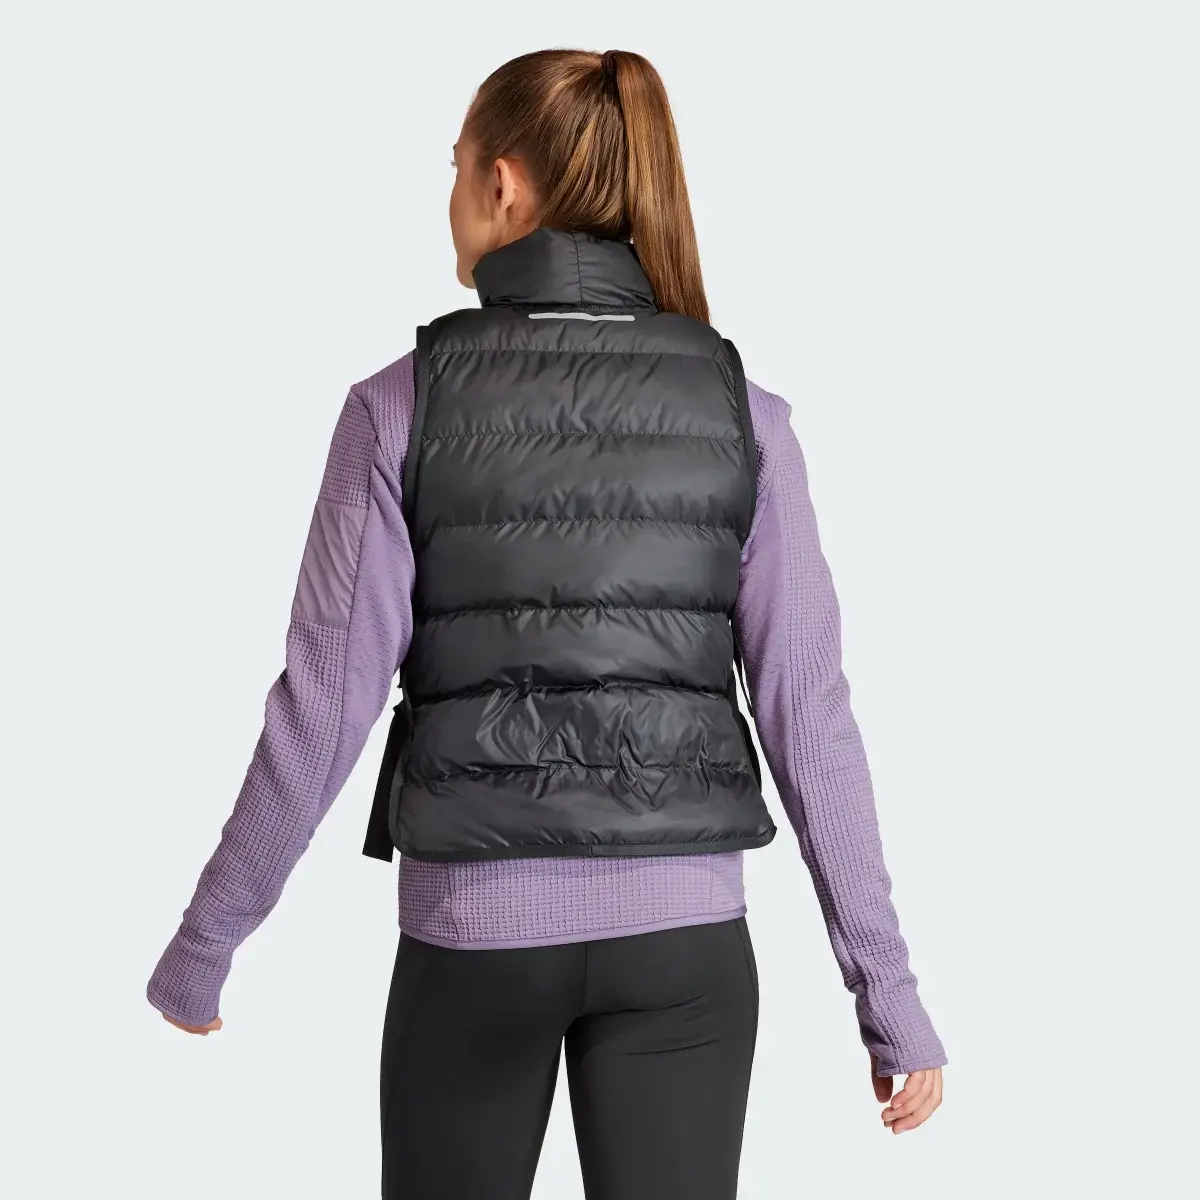 Adidas Ultimate Running Conquer the Elements Body Warmer Vest. 3